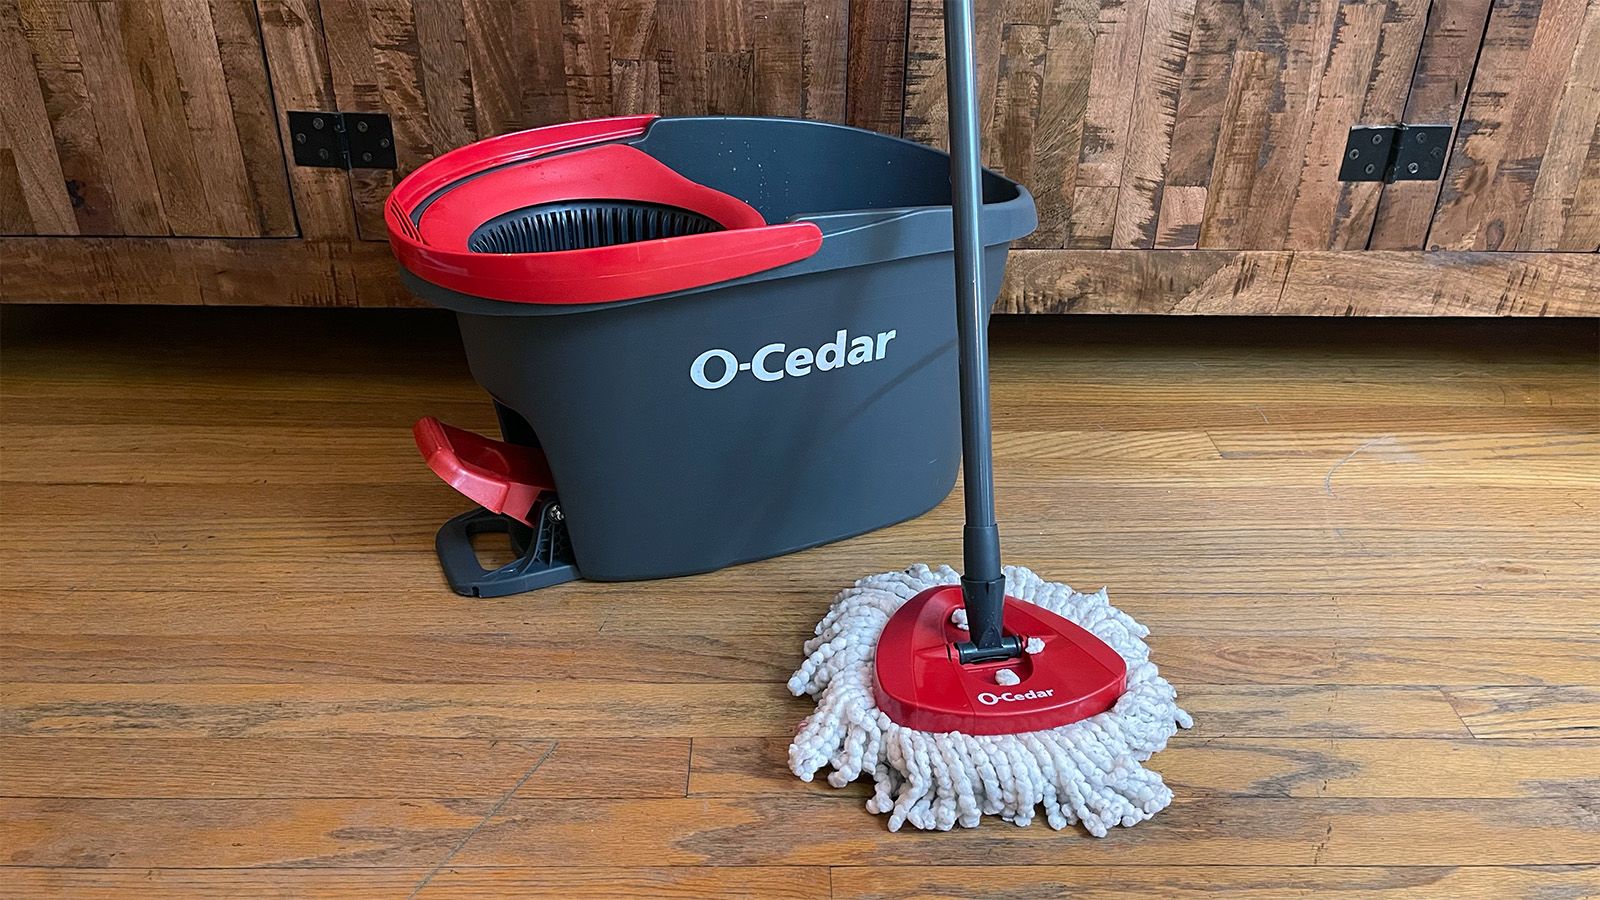 Spin Mop And Bucket Set Floor Cleaning Spin Dry With Microfiber Heads